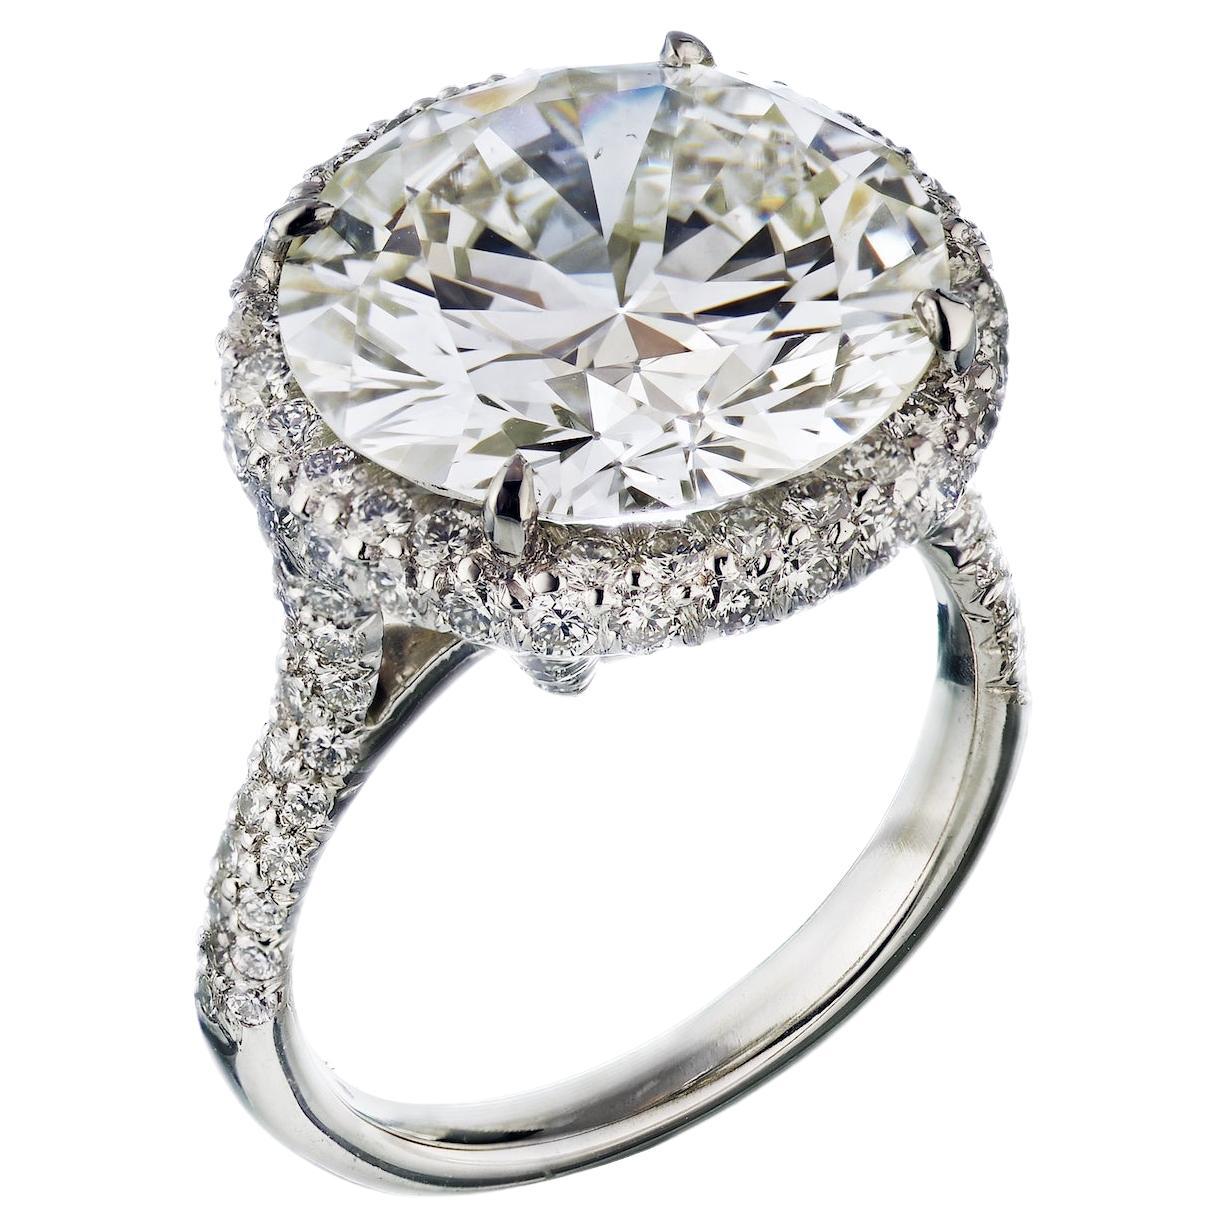 9 Carat Round Cut Diamond L/SI2 GIA Halo Engagement Ring For Sale